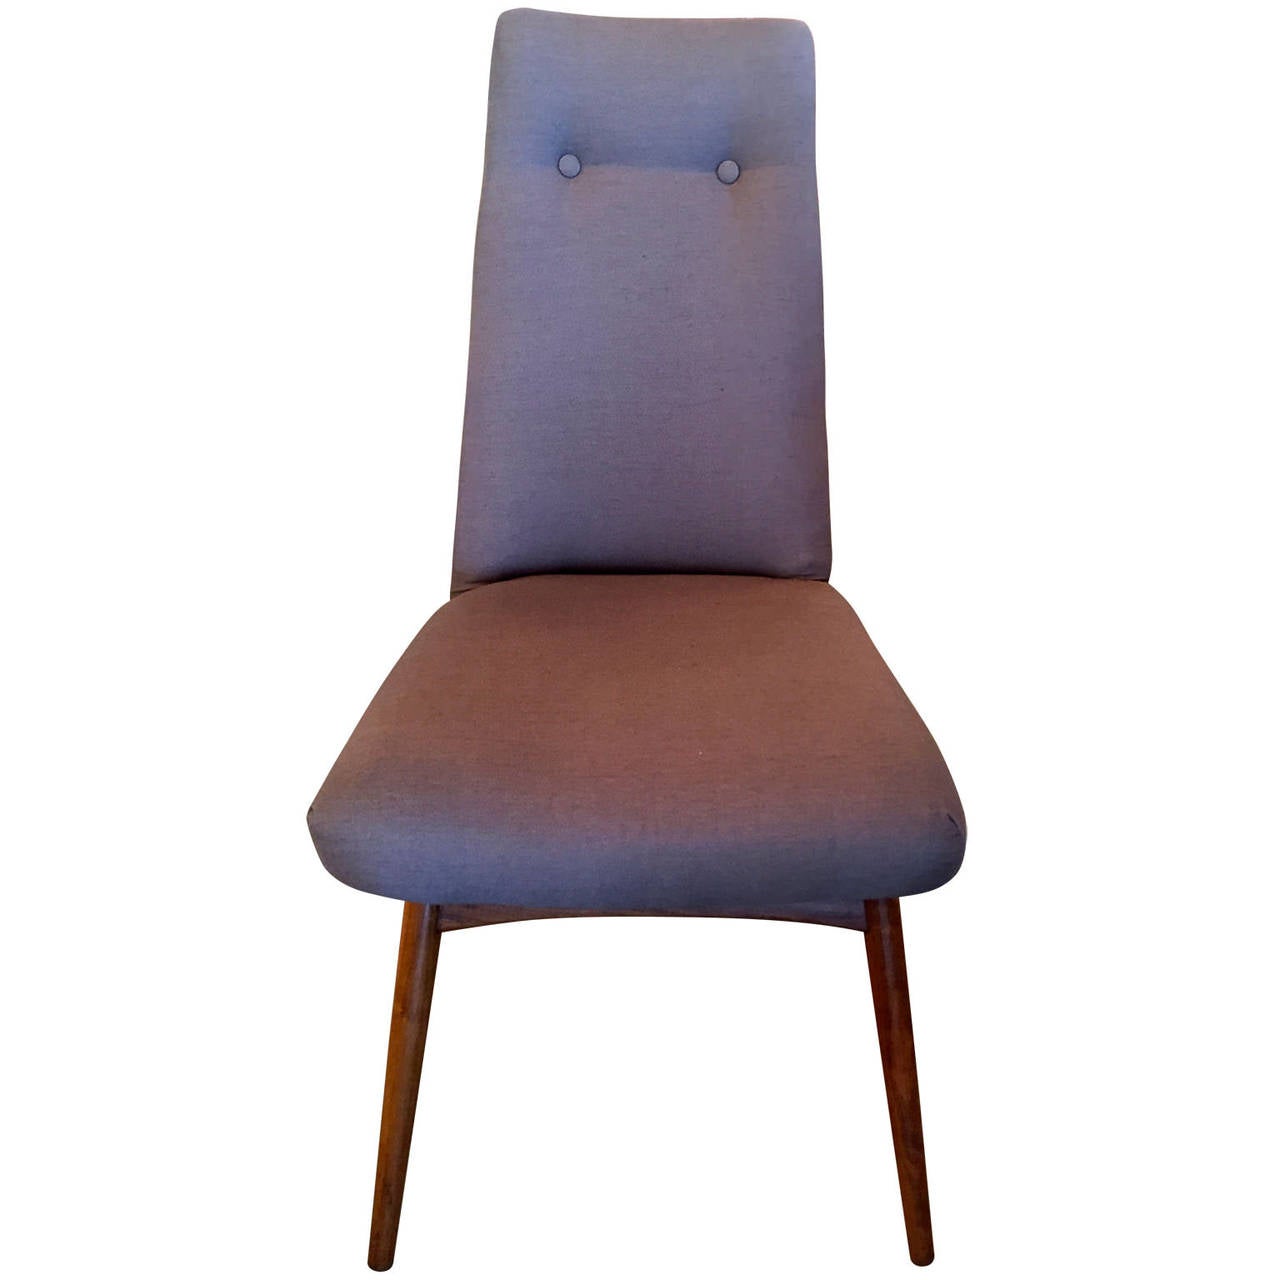 Offered is a mid century modern set of six Walnut and gray linen upholstered dining chairs by Adrian Pearsall.  Adrian Pearsall graduated from university with a degree in architectural engineering. He left the architectural field after two years and